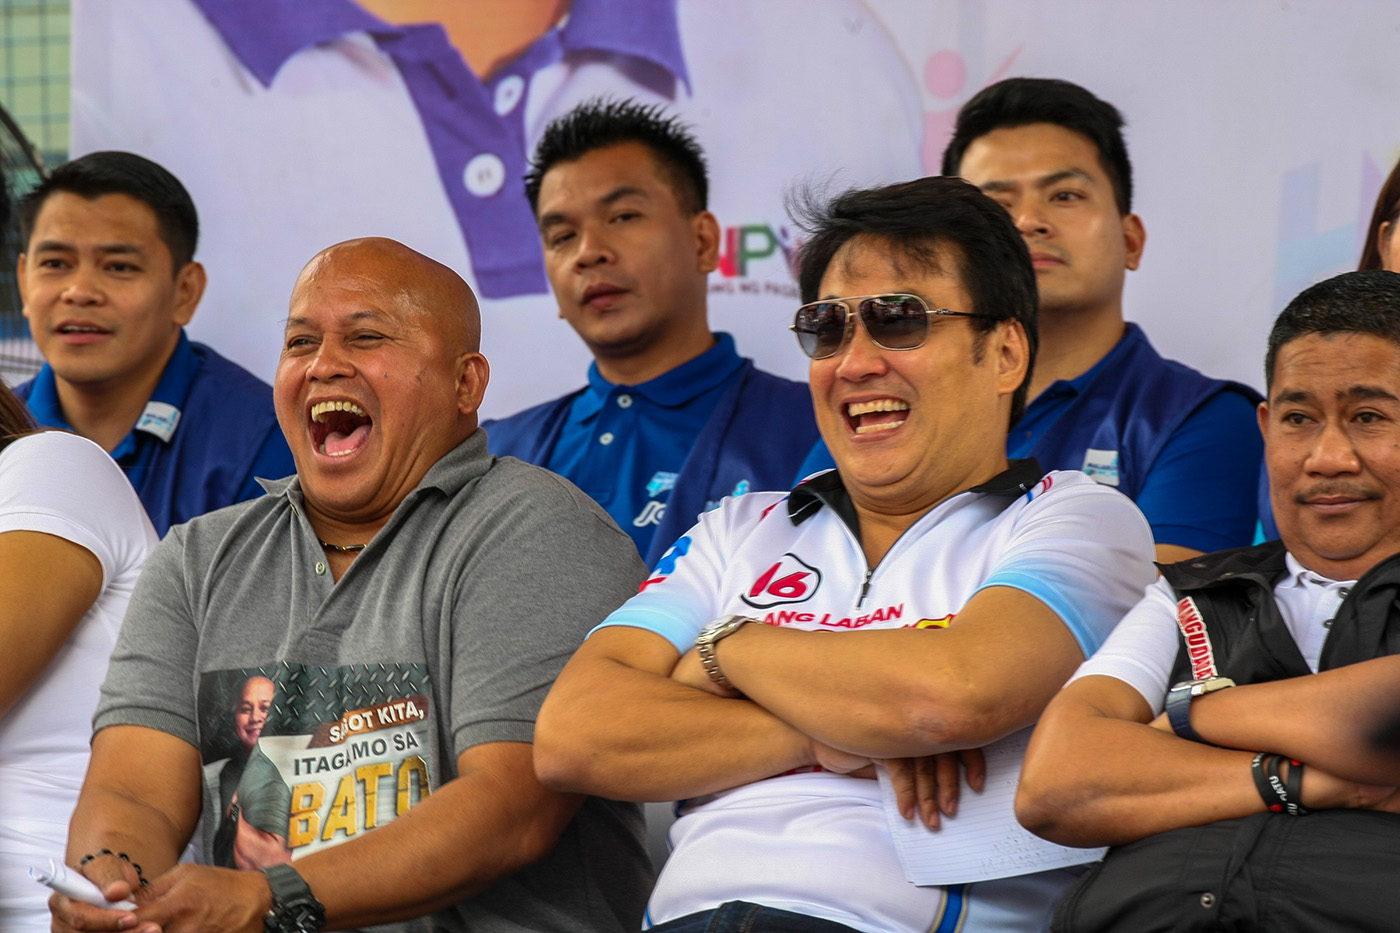 WEIGHING IN ON ISSUES. Ronald dela Rosa (left) sits beside Bong Revilla and other Hugpong ng Pagbabago candidates during a campaign rally. Photo by Maria Tan/Rappler 